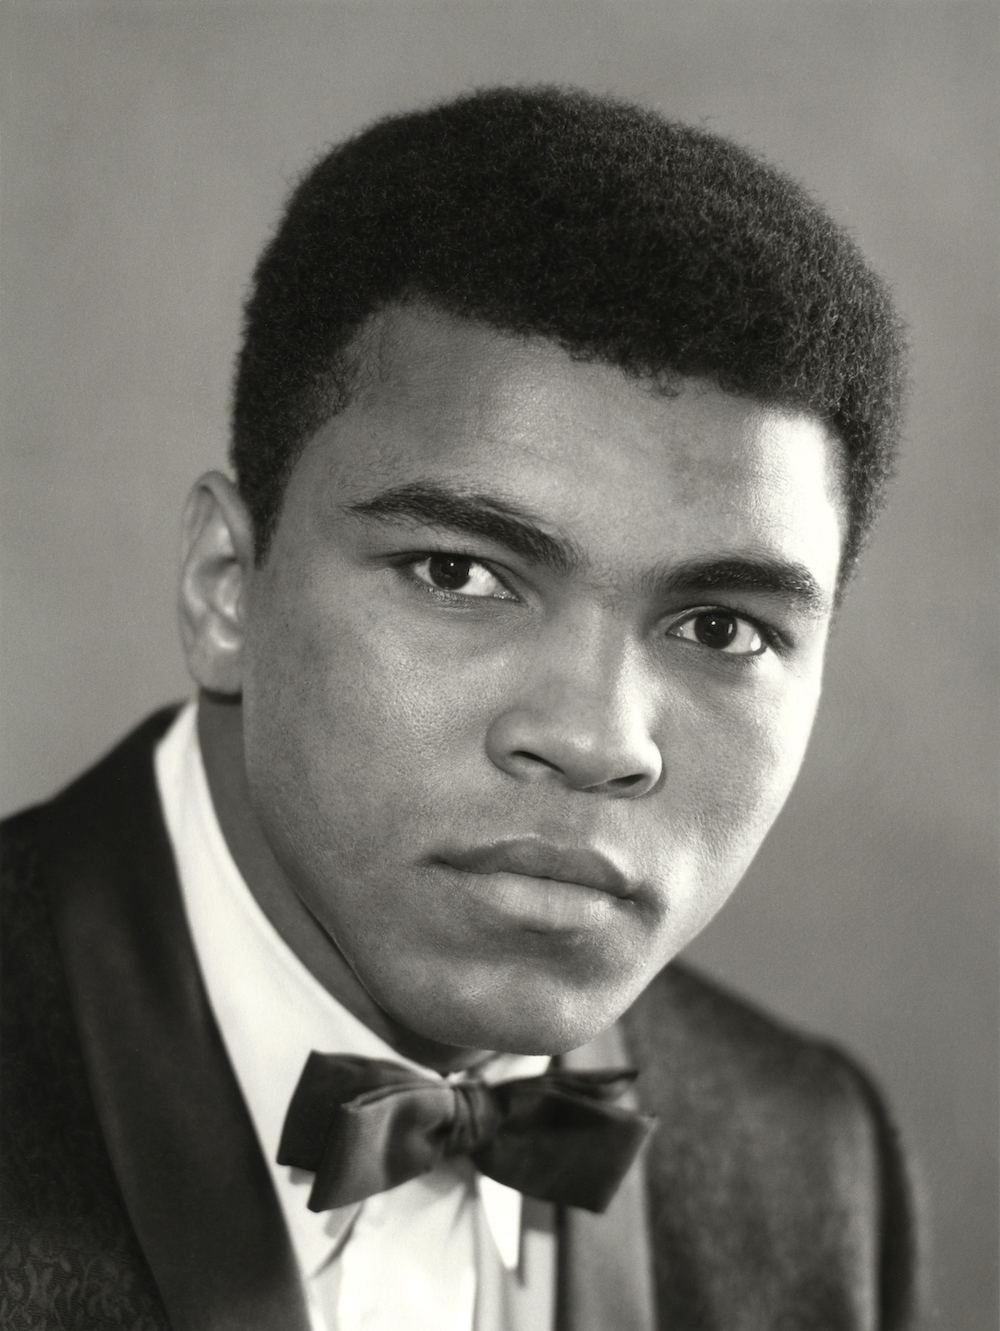 Muhammad Ali by Rex Coleman, for Baron Studios, 23 May 1966. © National Portrait Gallery, London